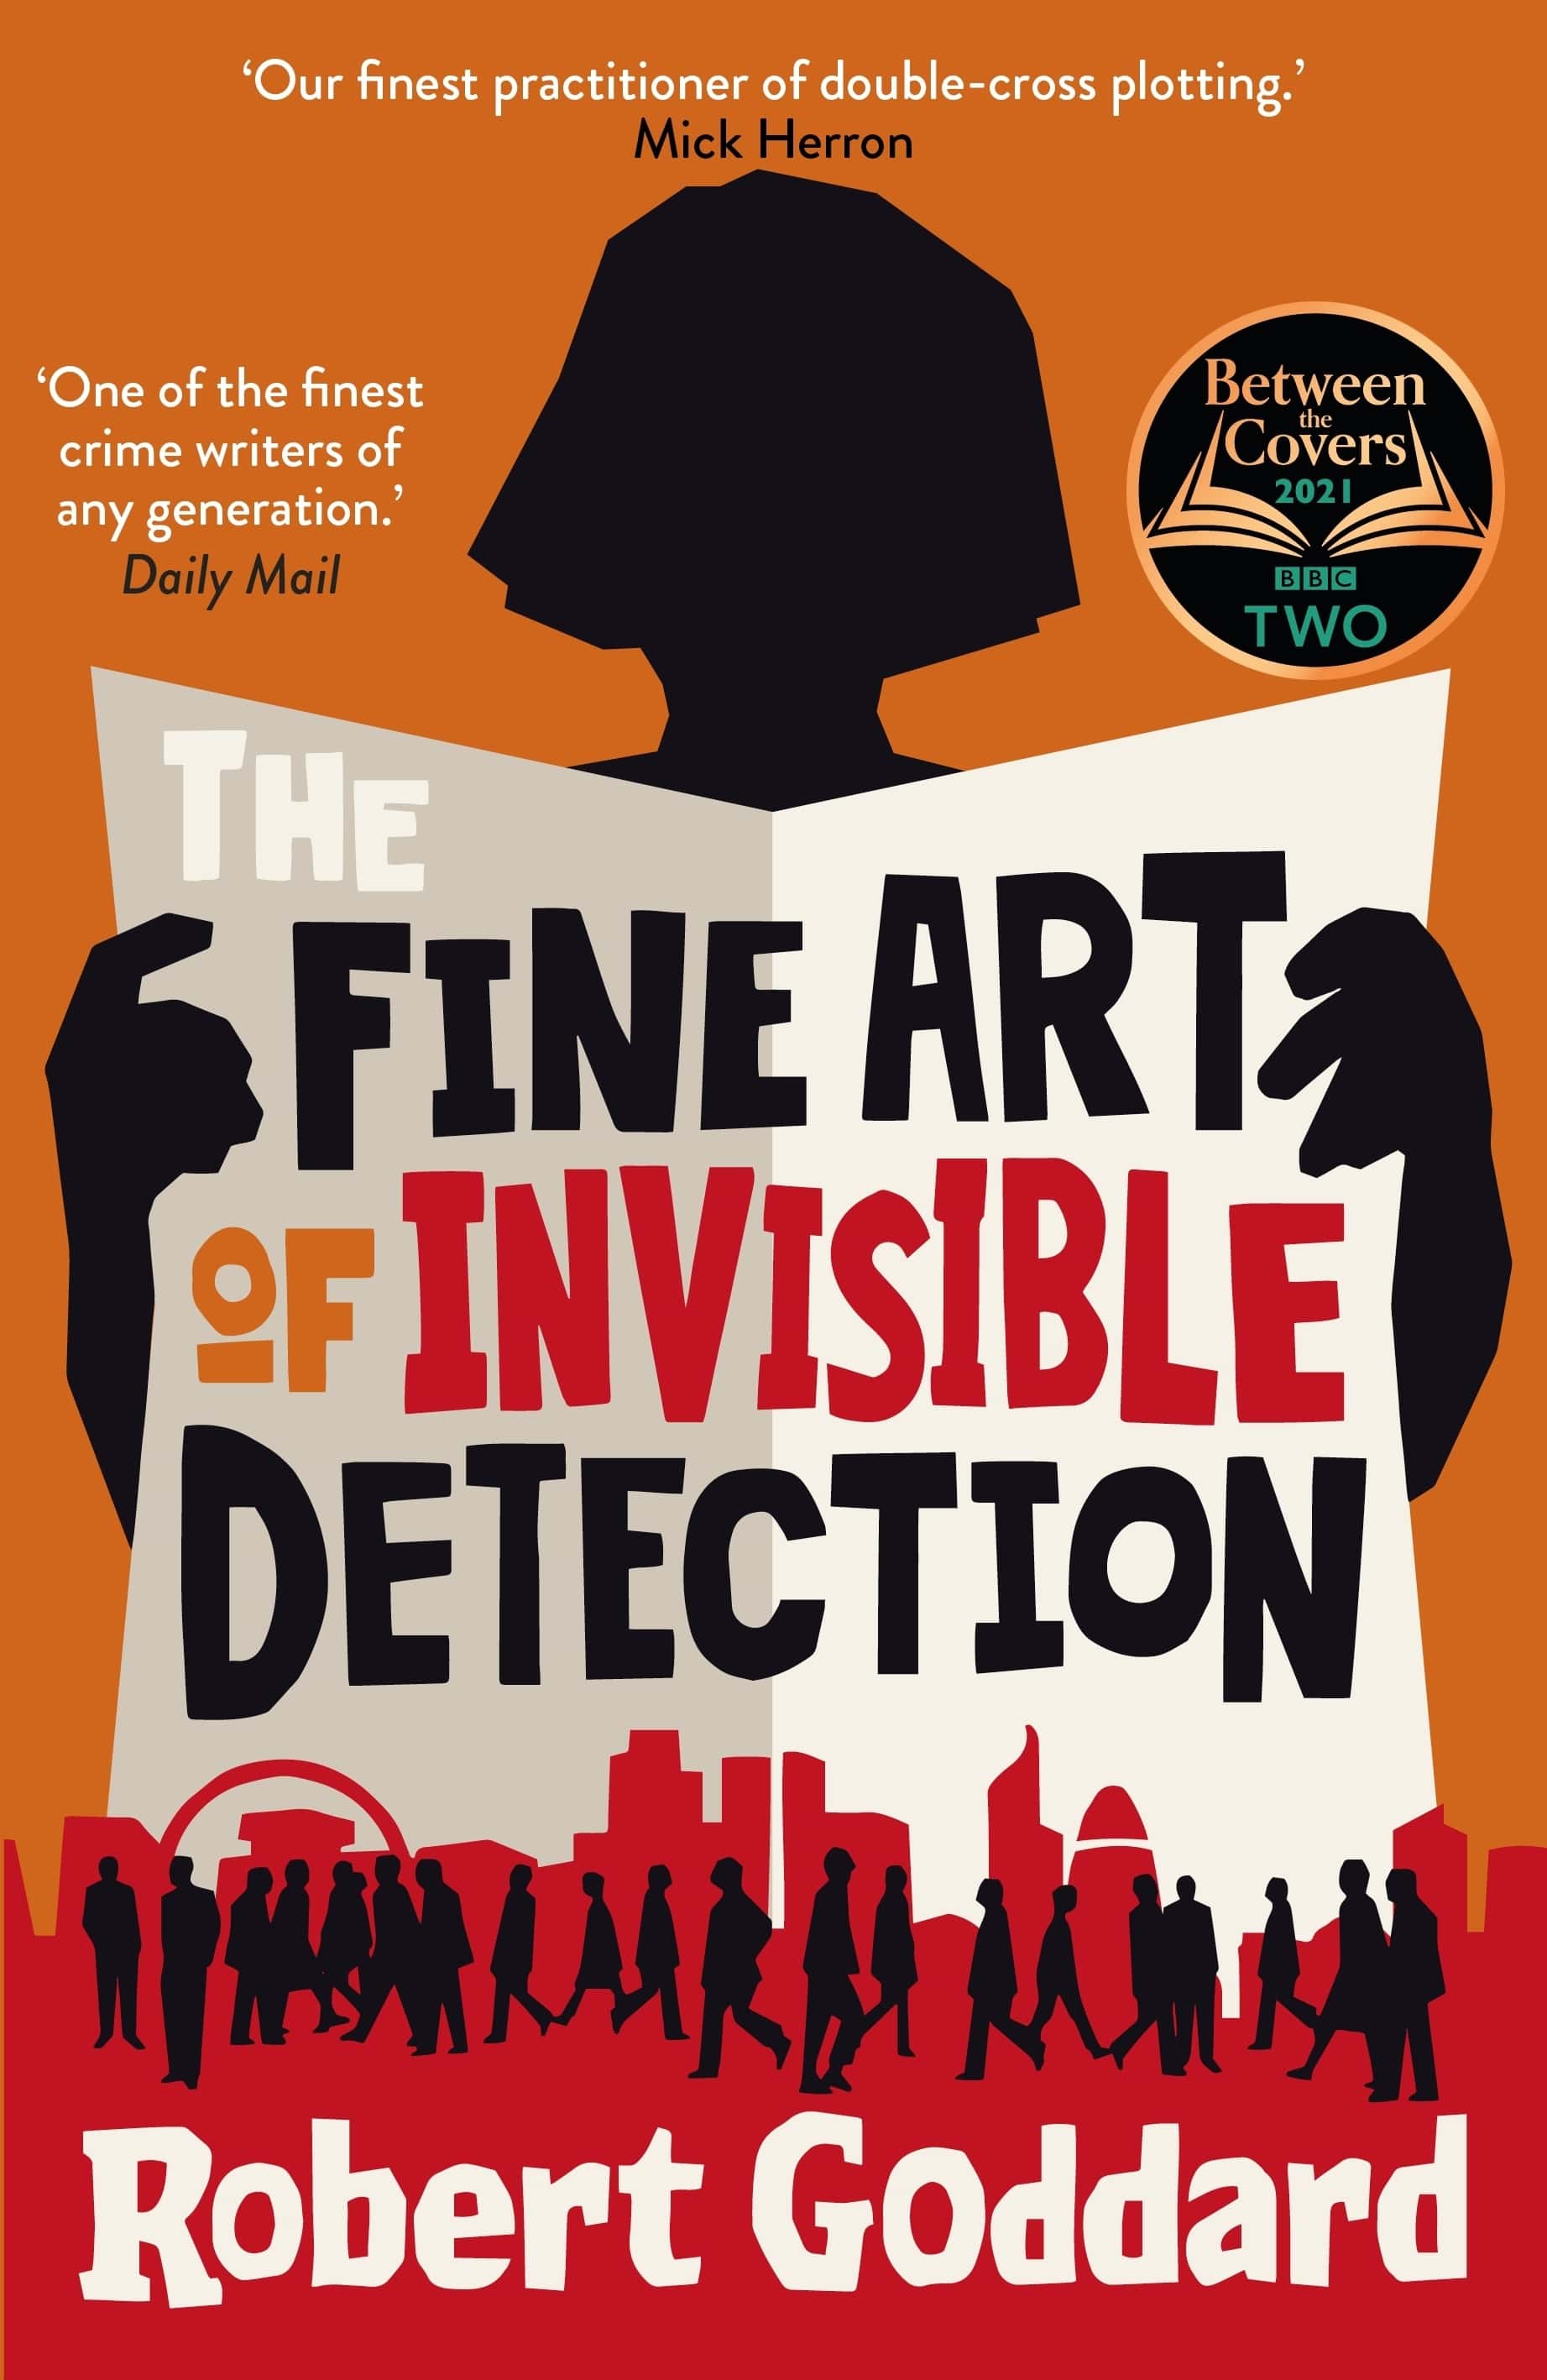 Book cover of The Fine Art of Invisible Detection by Robert Goddard